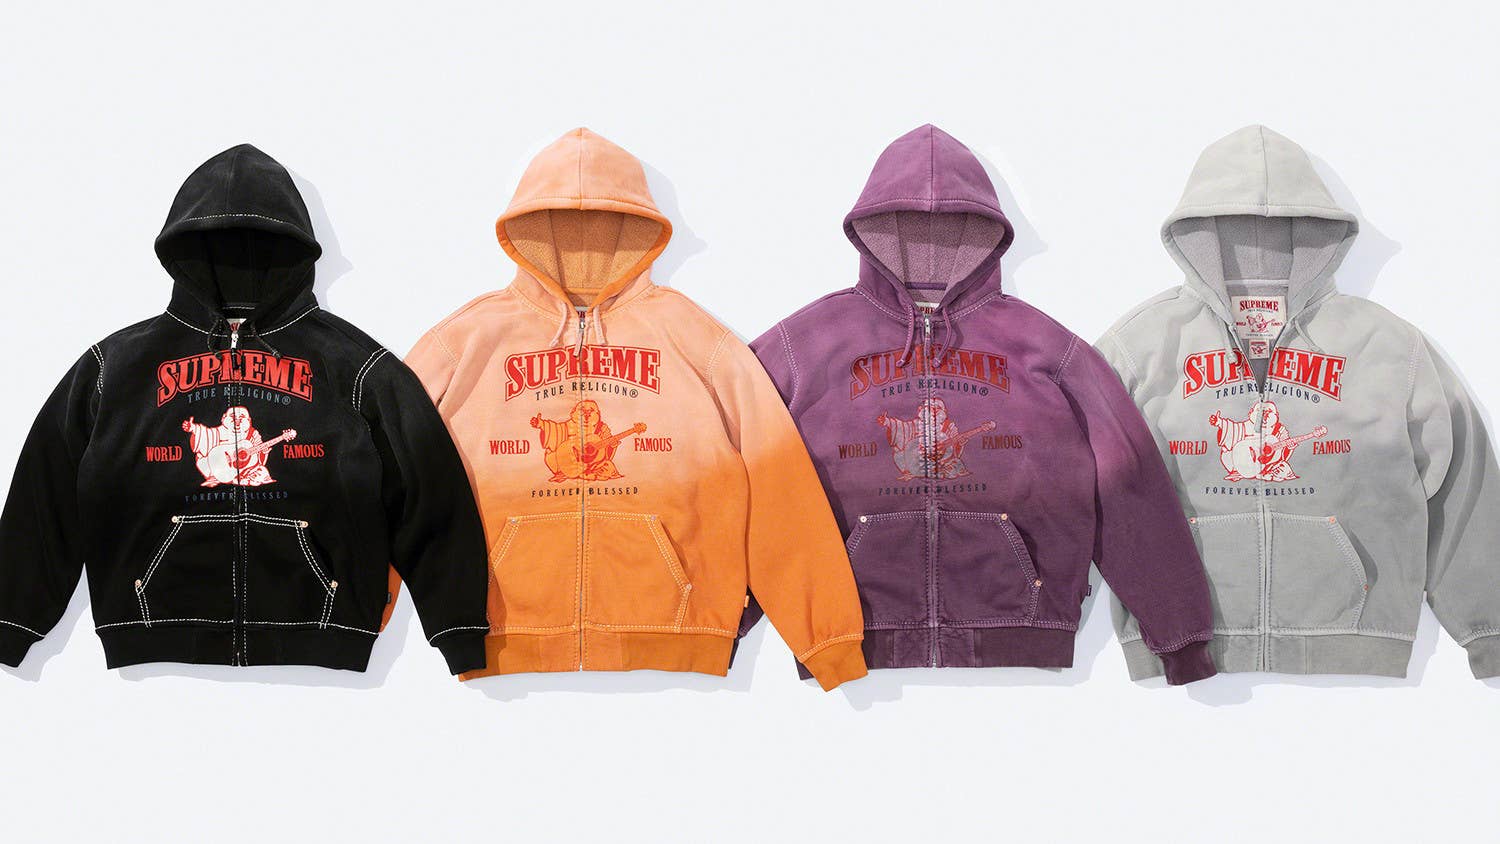 supreme jacket - Best Prices and Online Promos - Men's Apparel Oct